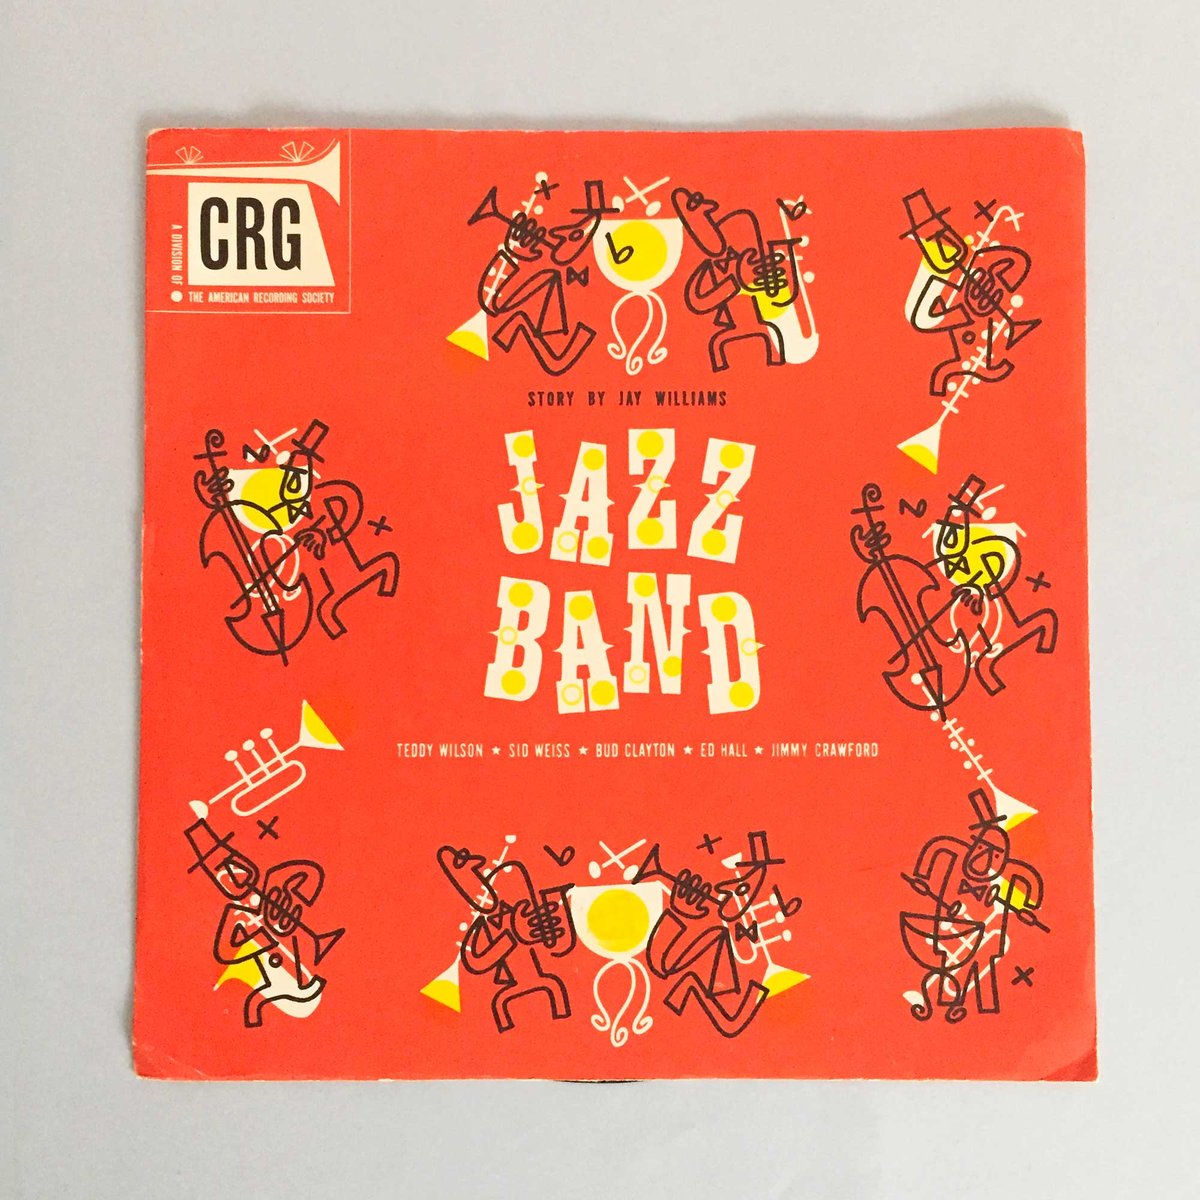 Image of Disque CRG Jazz Band